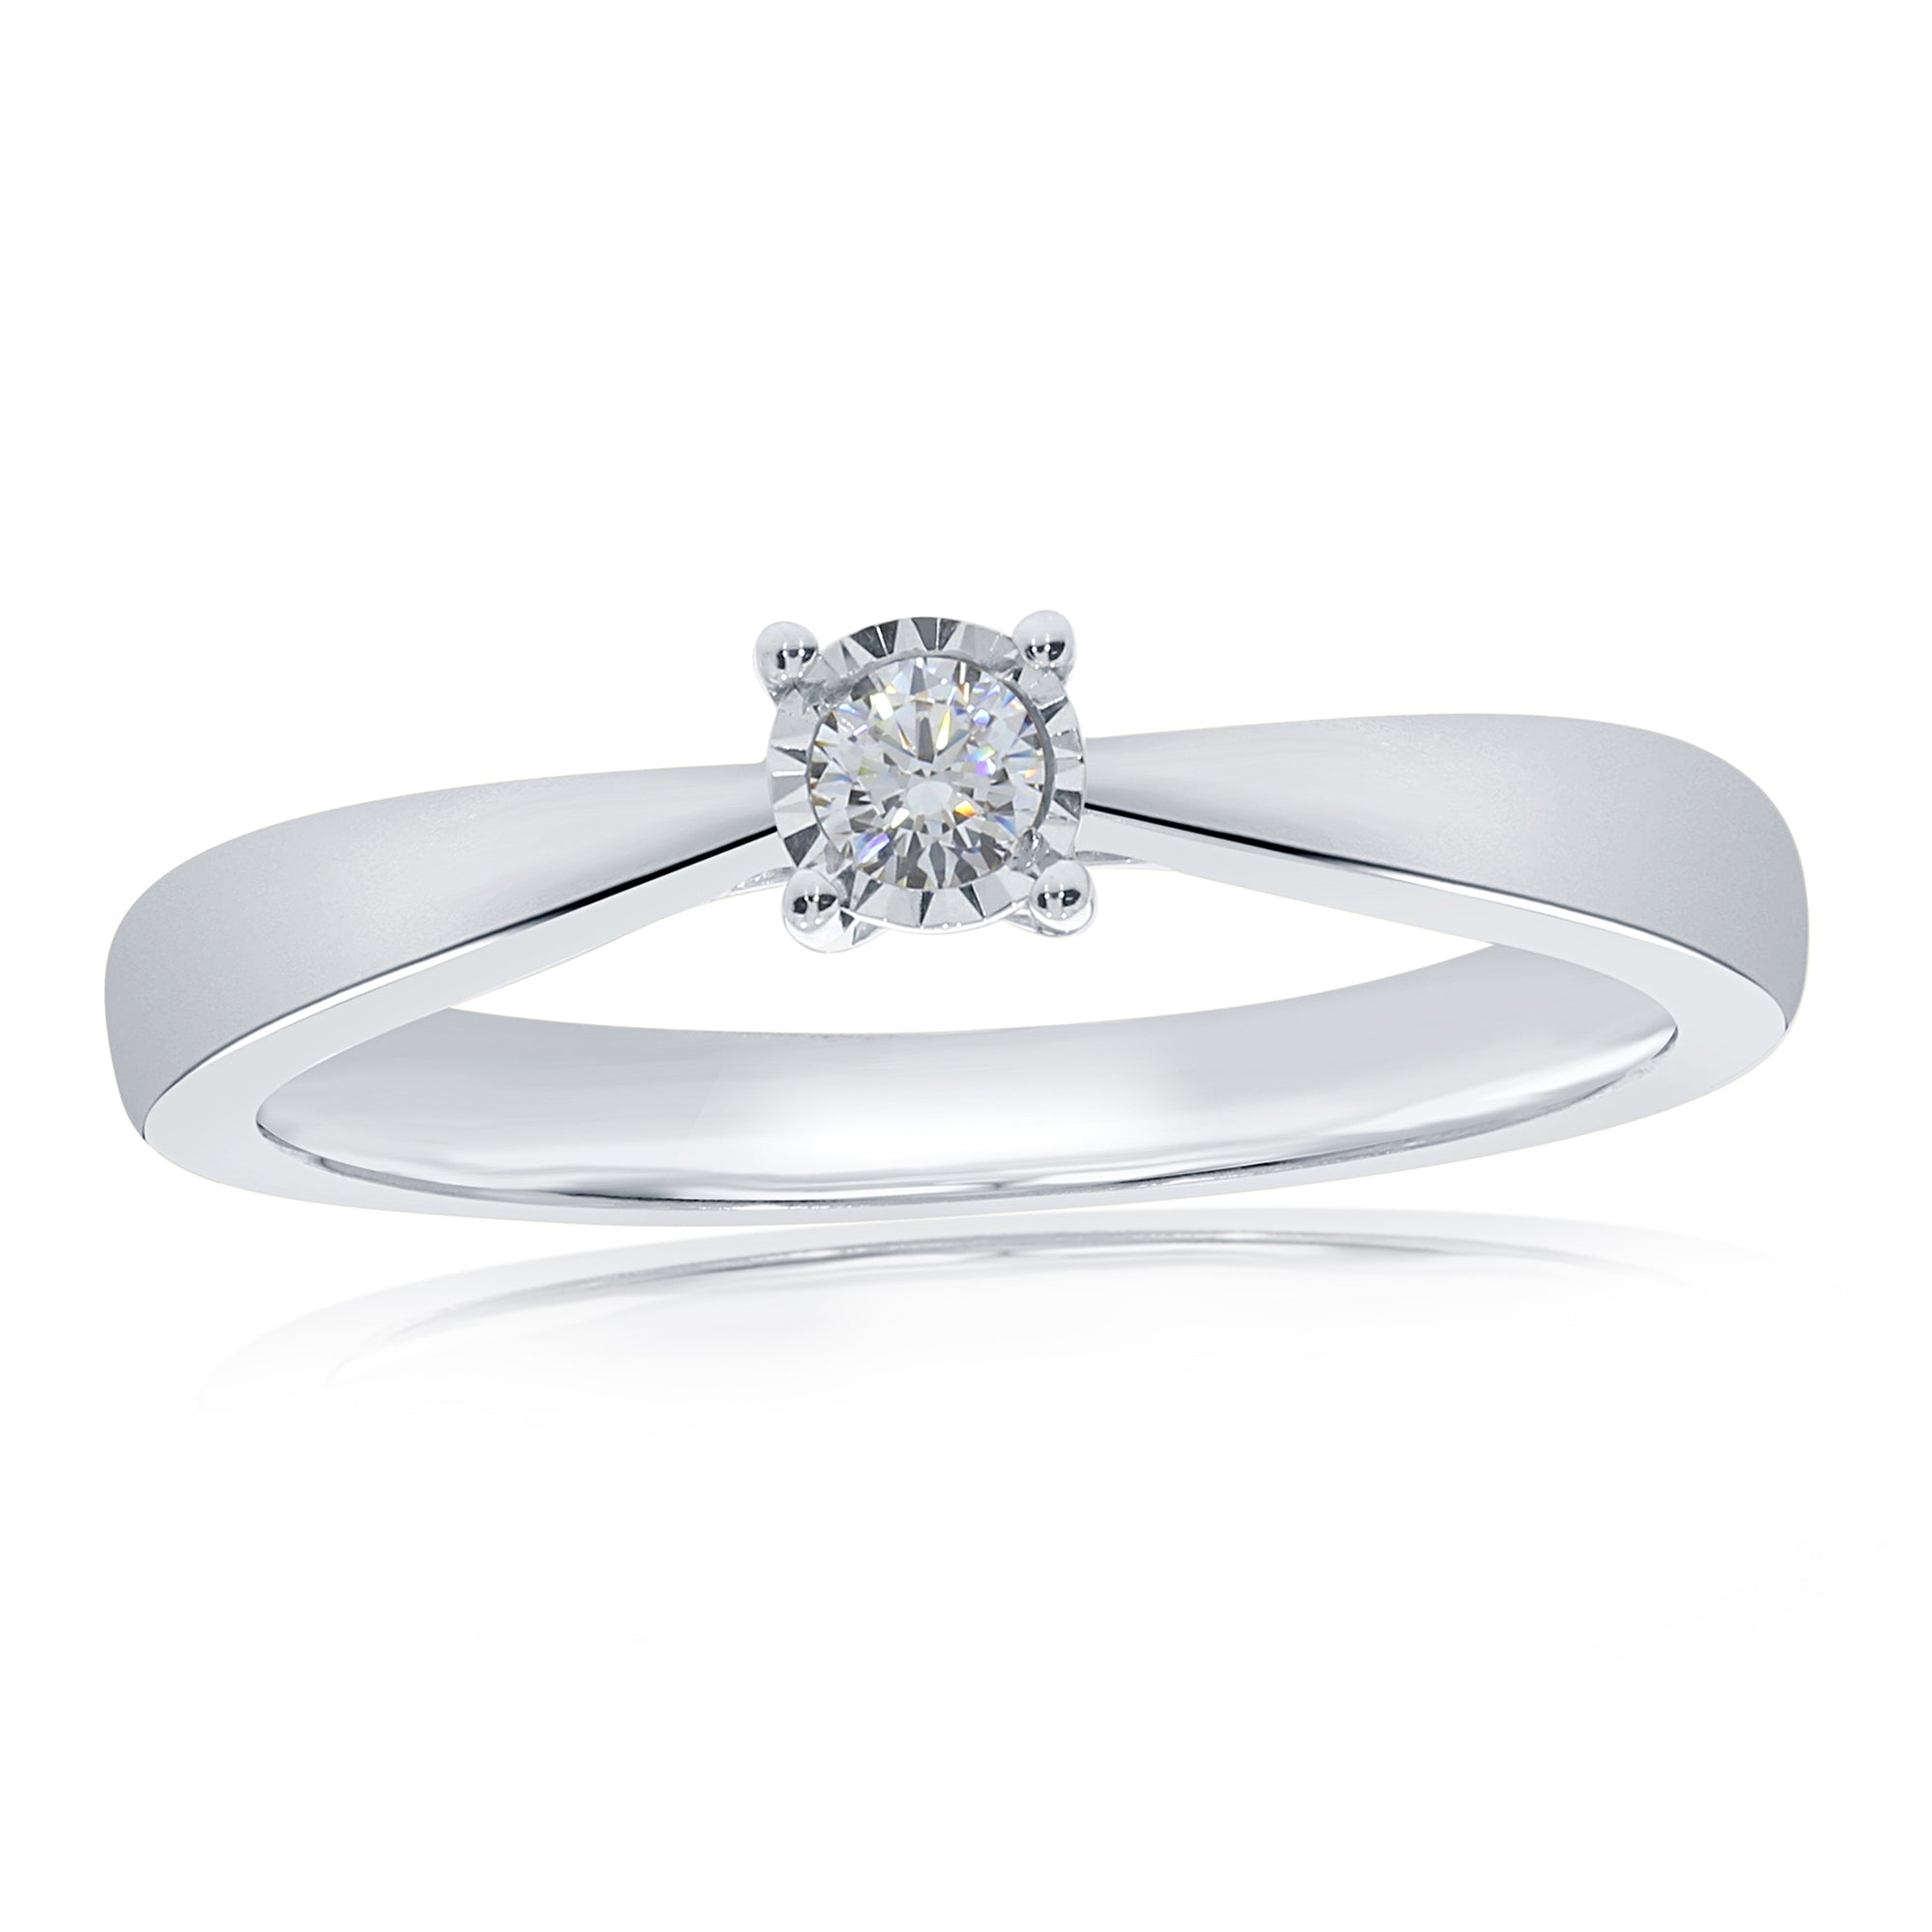 9ct white gold single stone miracle plate diamond ring 0.08ct